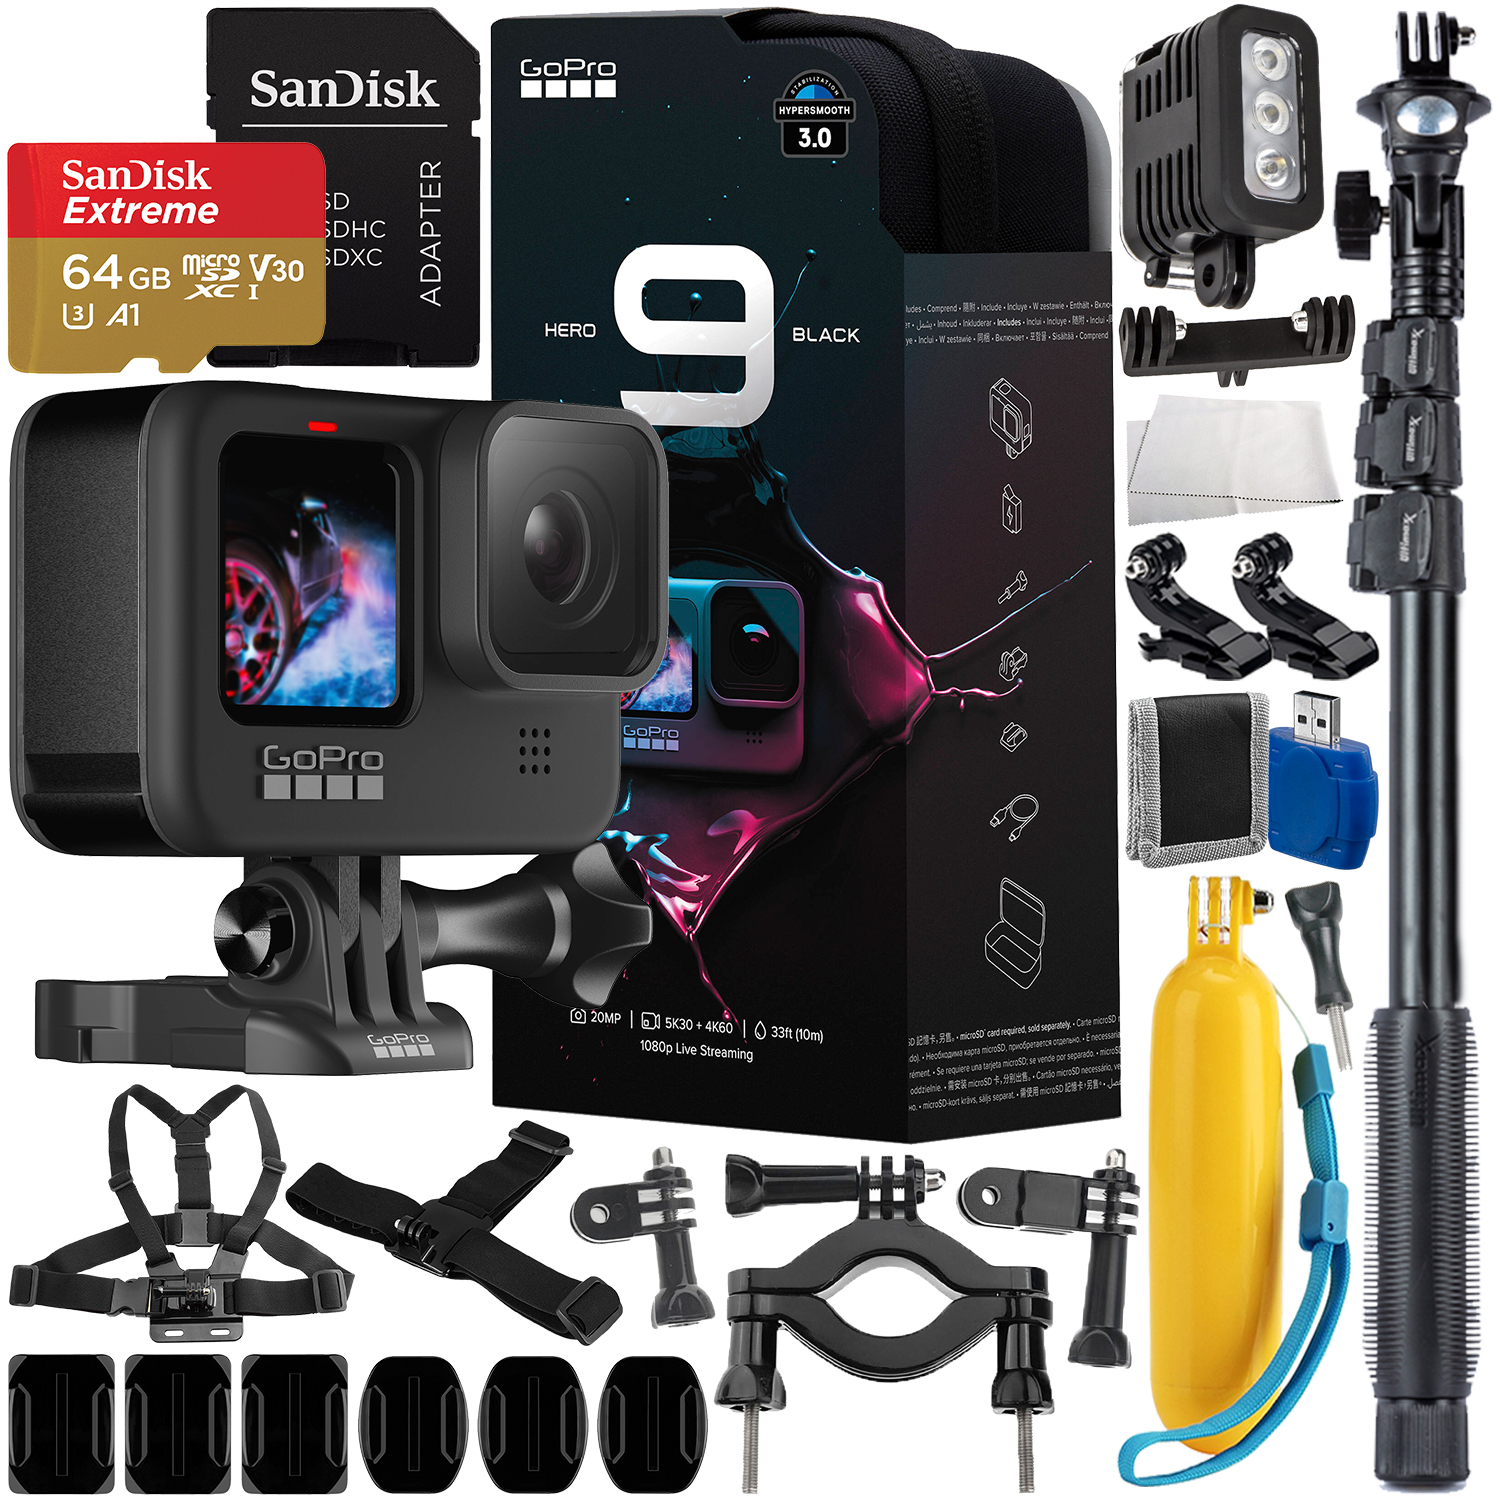 GoPro HERO9 (Hero 9) Action Camera (Black) with Water Sports Accessory Bundle - Includes: SanDisk Extreme 64GB microSDXC Memory Card, Underwater LED Light, 48â? Selfie Stick / Monopod, & MUCH MORE